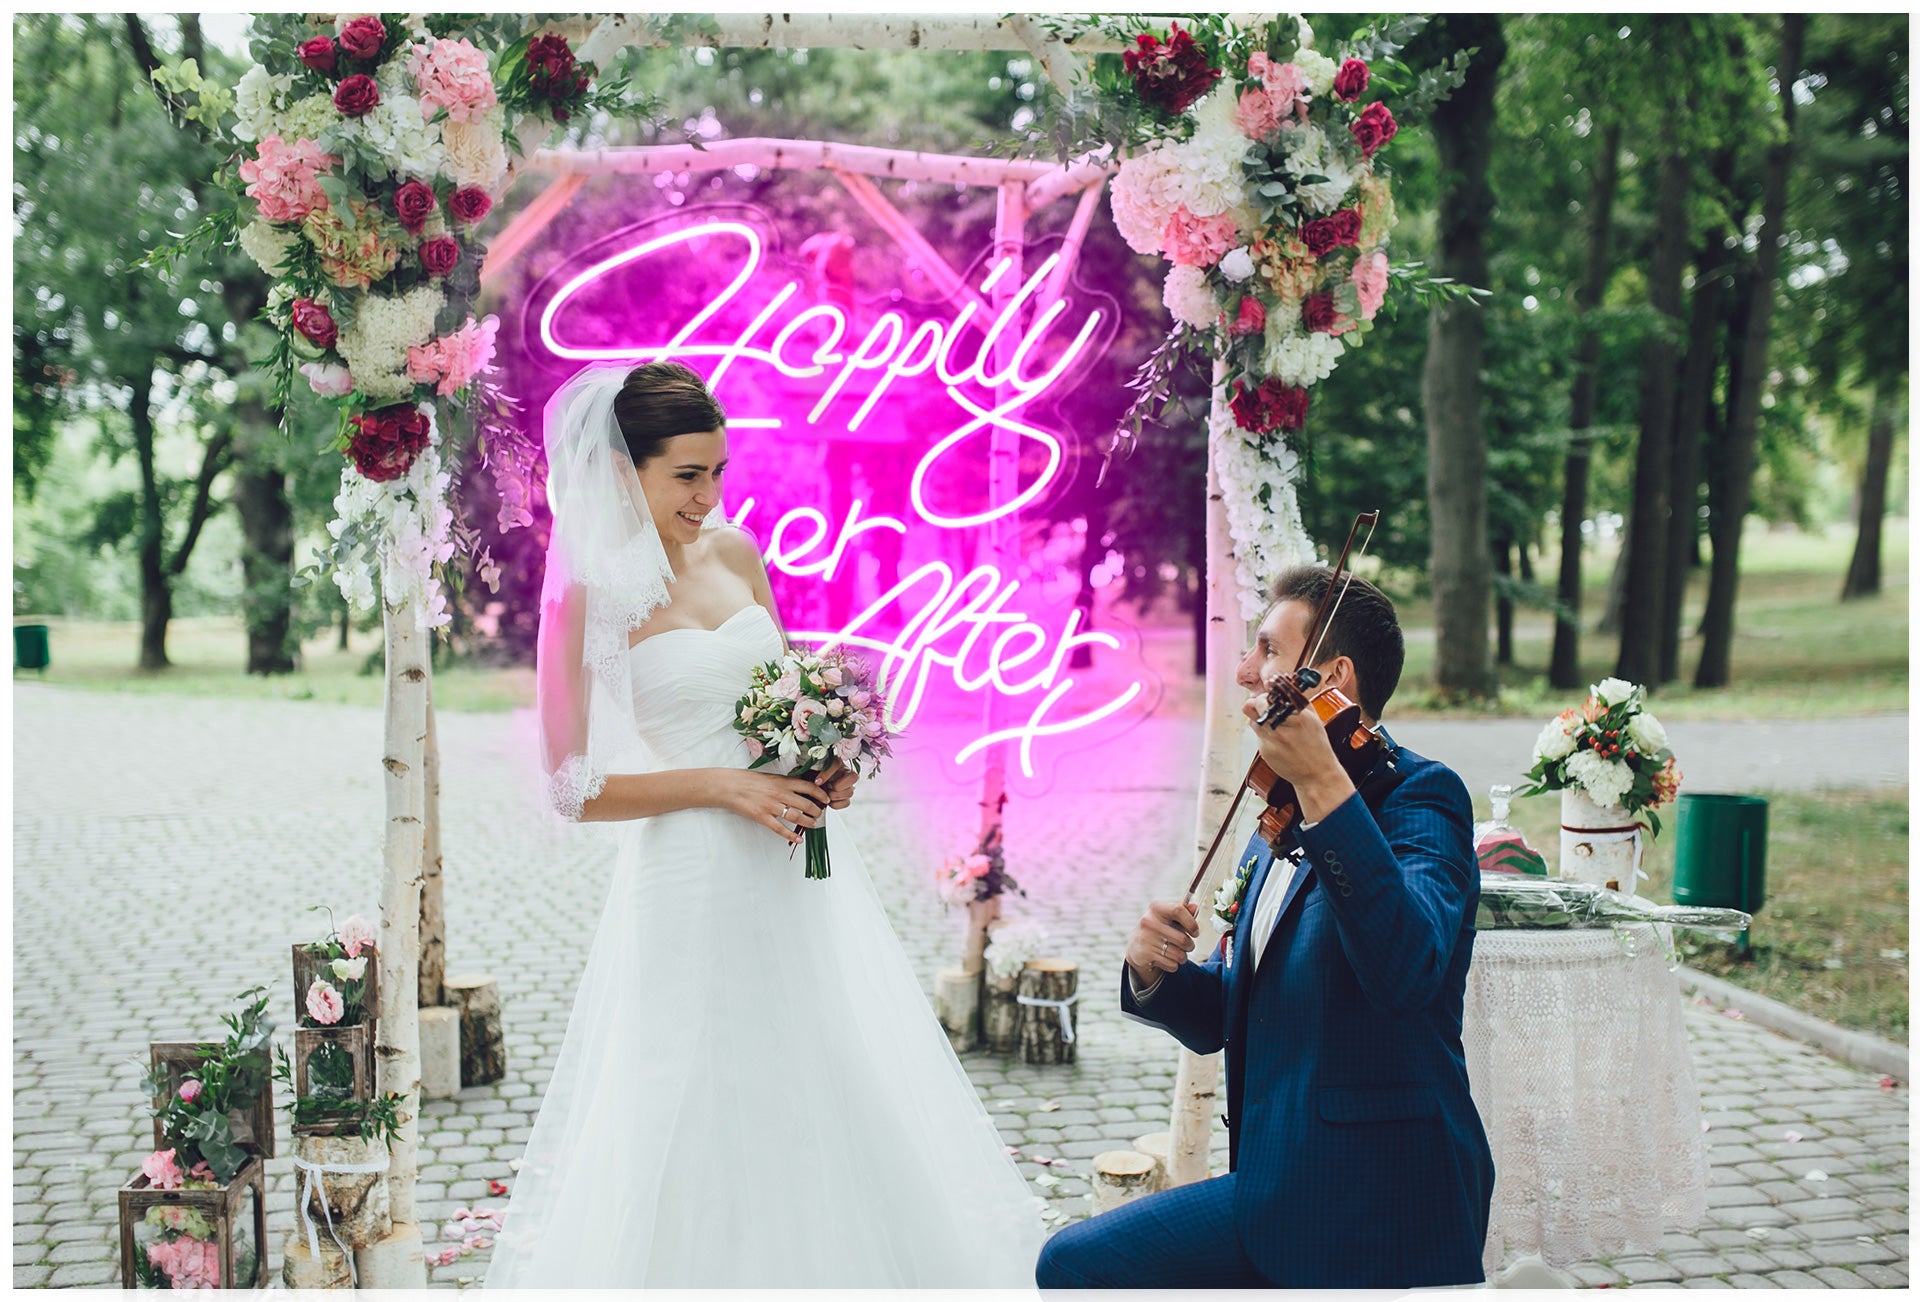 happily ever after neon sign-NeonPartys